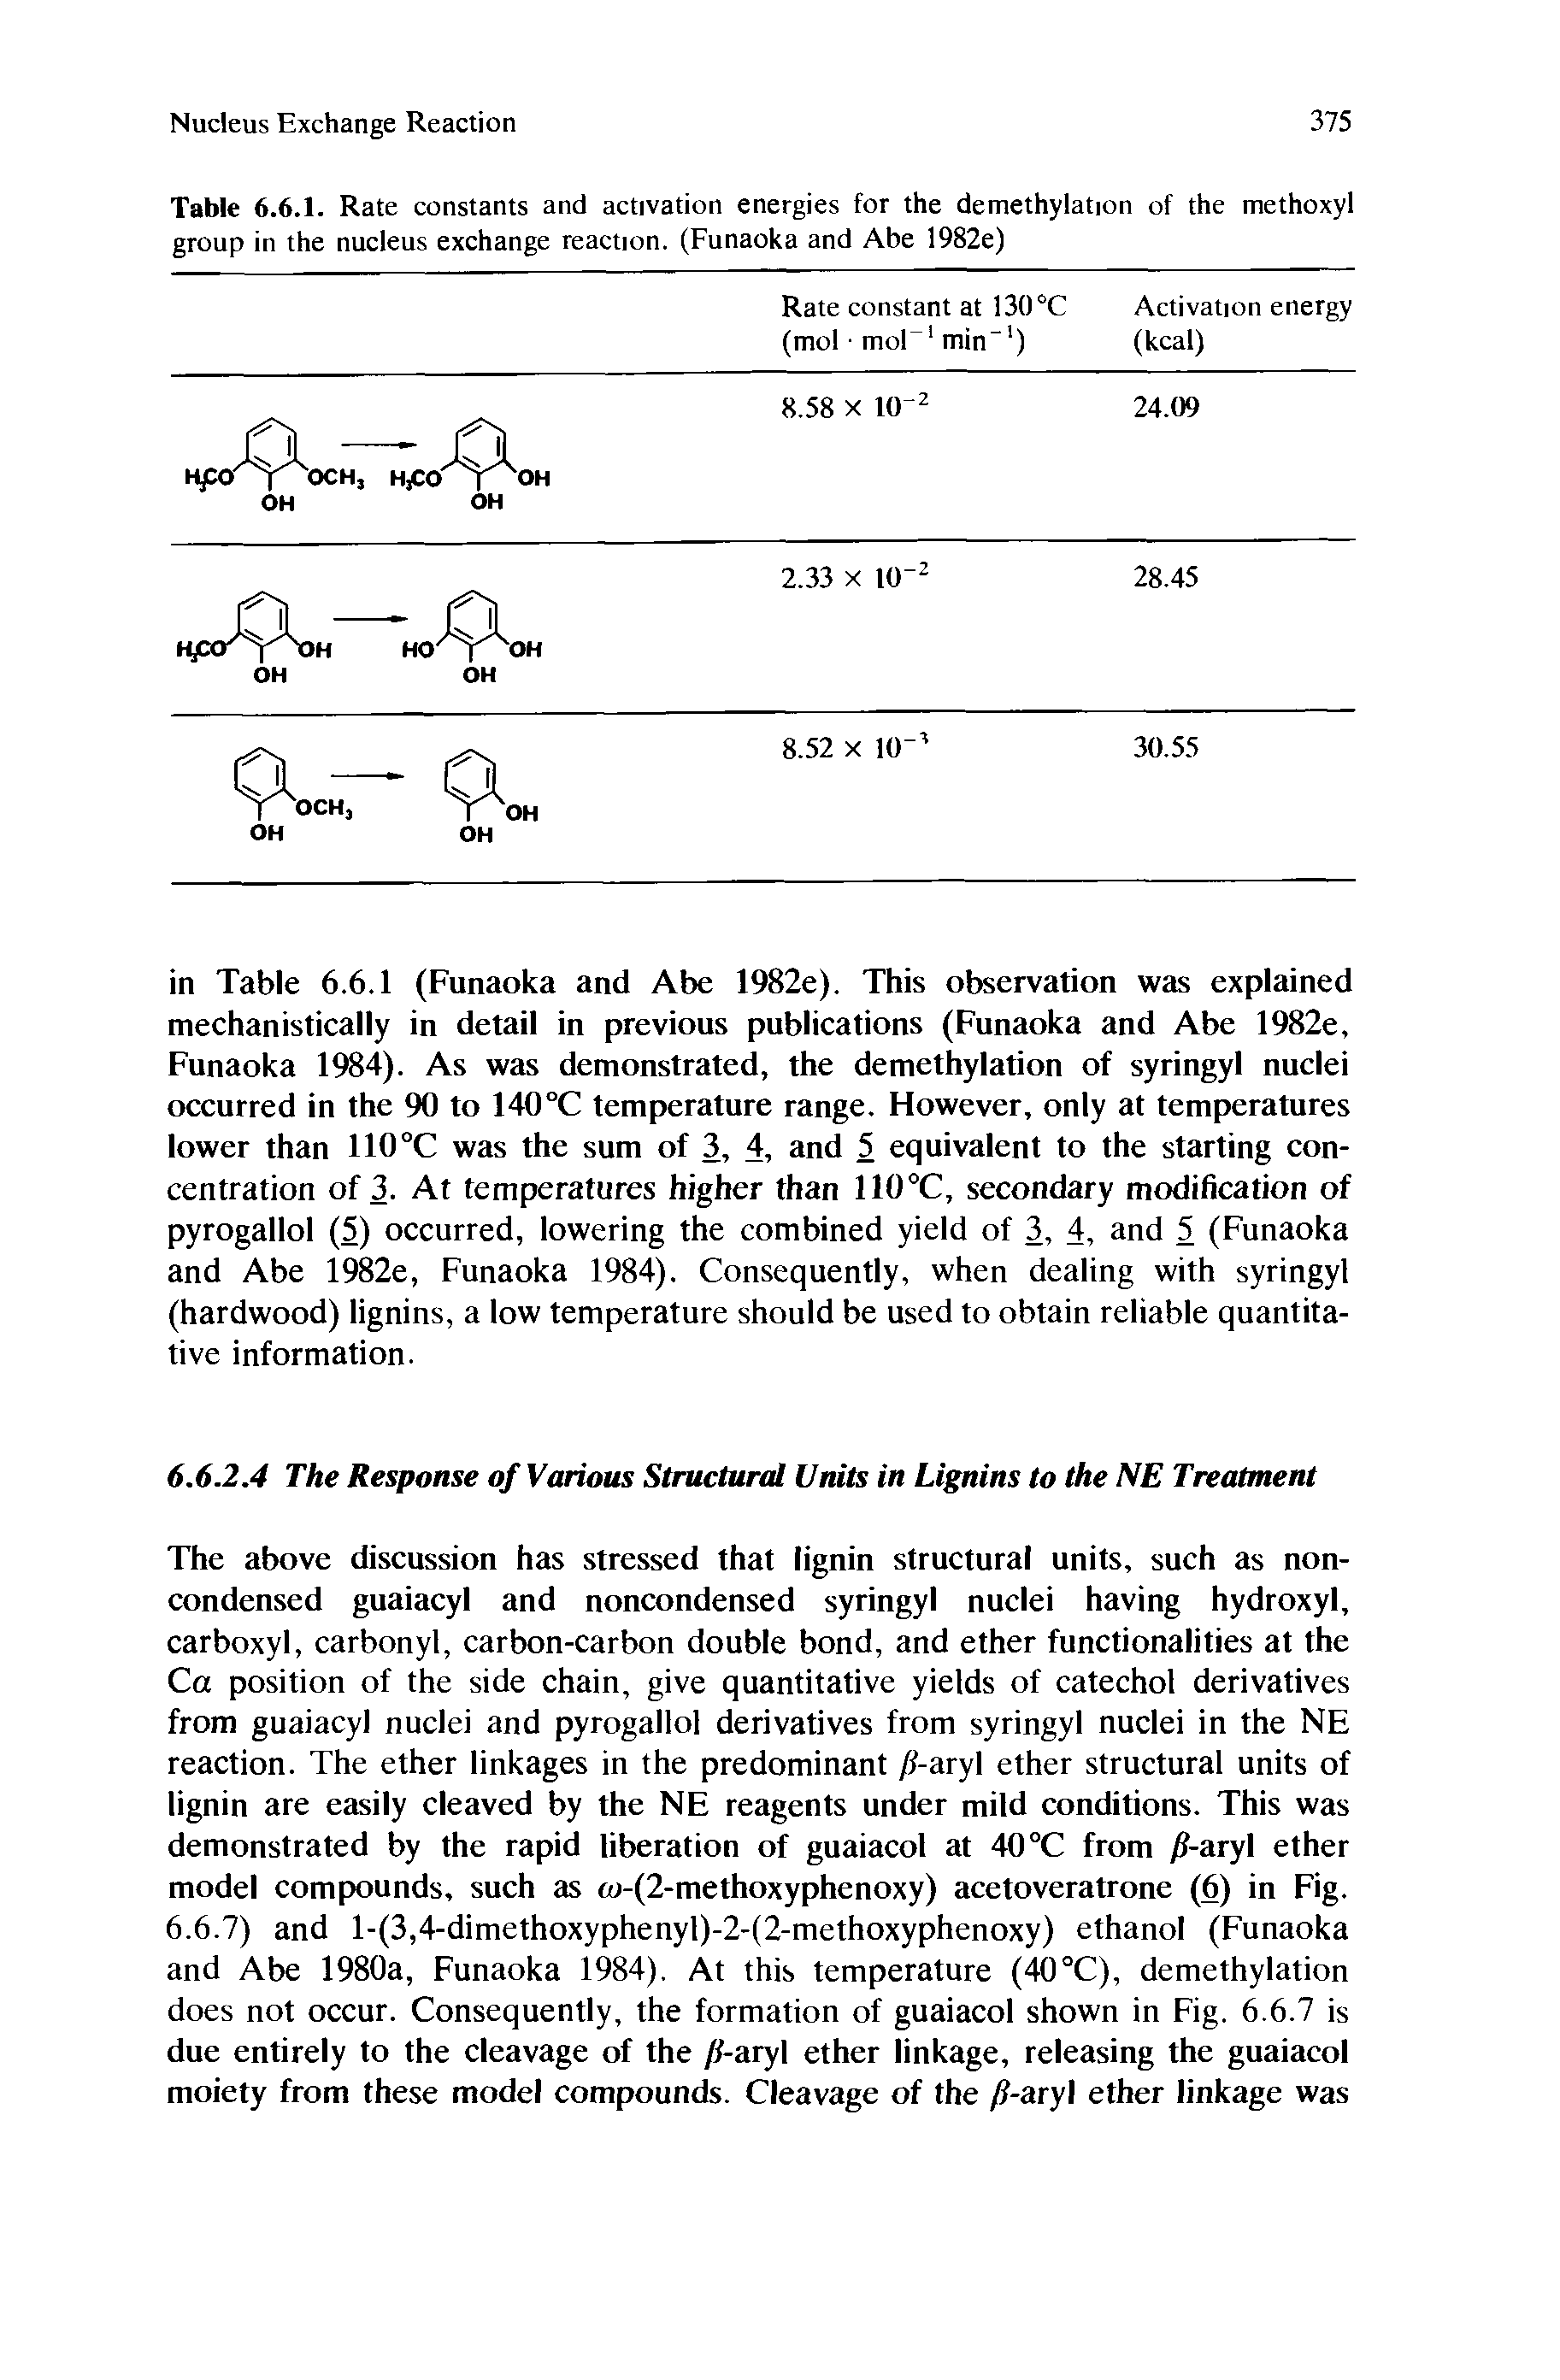 Table 6.6.1. Rate constants and activation energies for the demethylation of the methoxyl group in the nucleus exchange reaction. (Funaoka and Abe 1982e)...